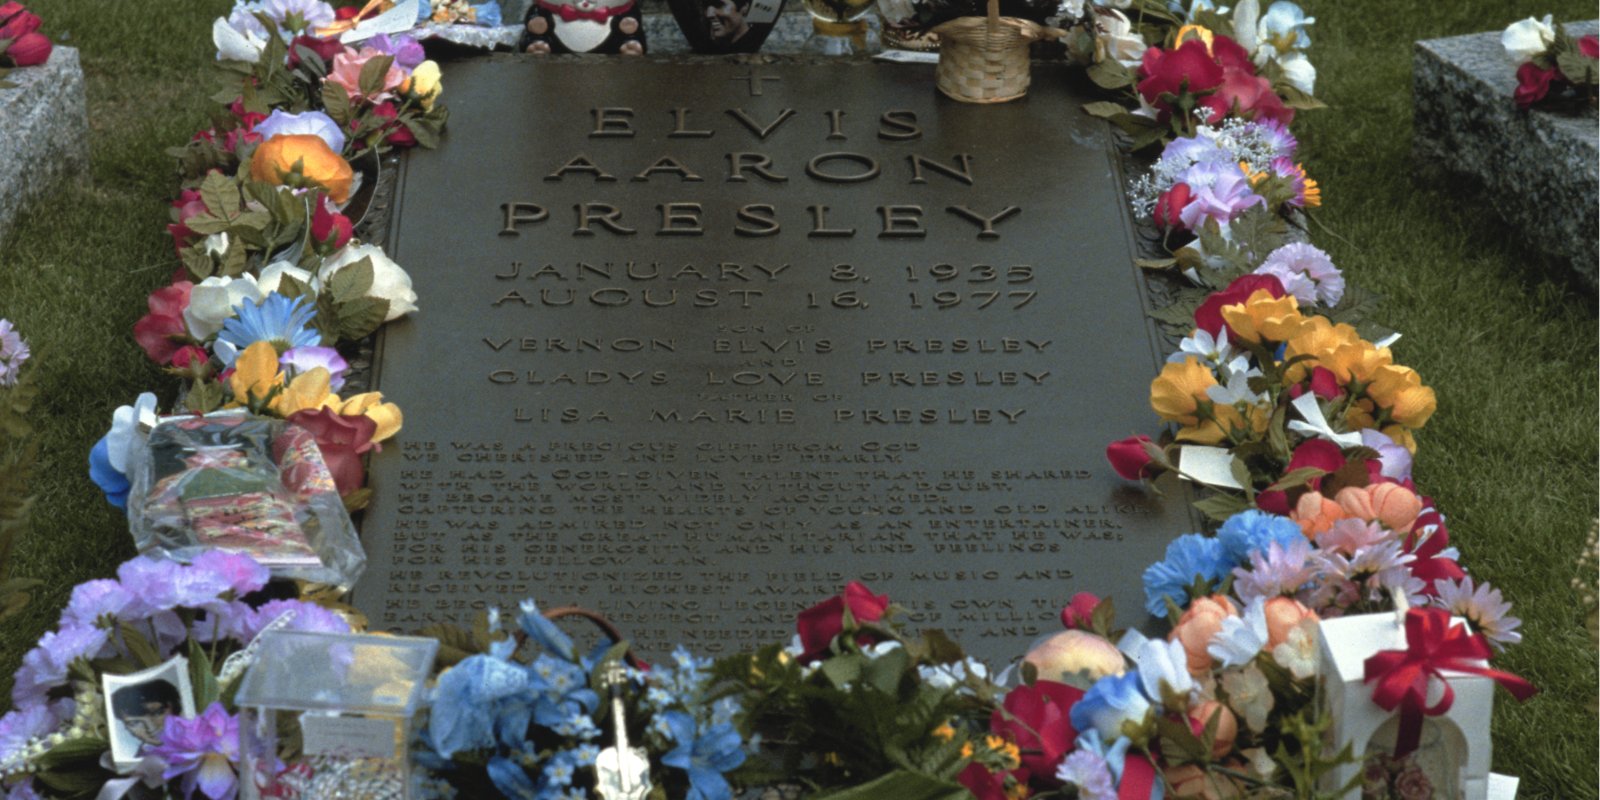 Elvis Presley's tombstone located at Graceland in Memphis, TN.